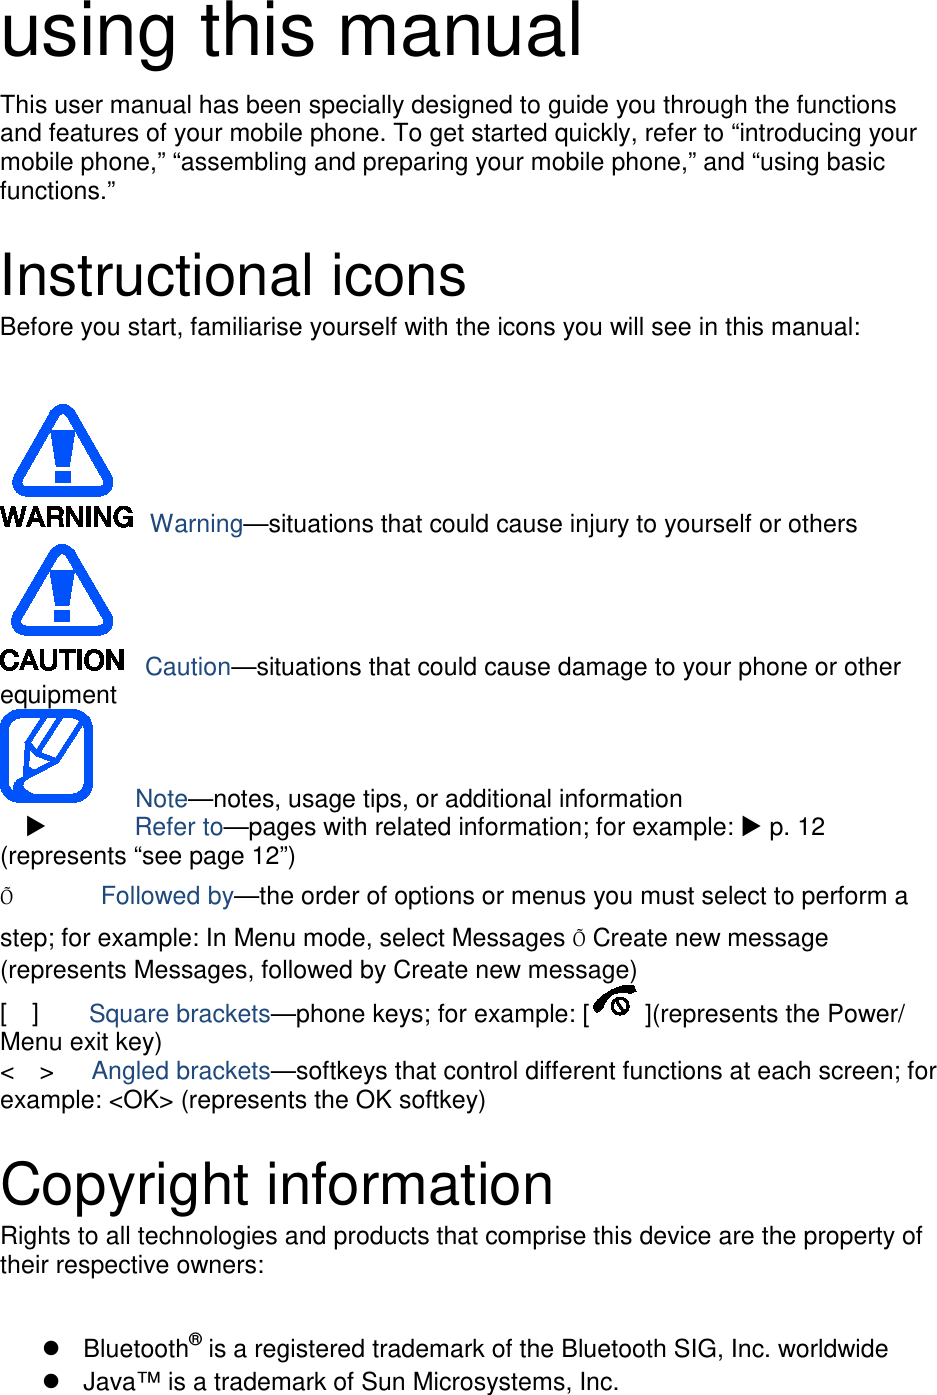 using this manual This user manual has been specially designed to guide you through the functions and features of your mobile phone. To get started quickly, refer to “introducing your mobile phone,” “assembling and preparing your mobile phone,” and “using basic functions.”  Instructional icons Before you start, familiarise yourself with the icons you will see in this manual:     Warning—situations that could cause injury to yourself or others  Caution—situations that could cause damage to your phone or other equipment    Note—notes, usage tips, or additional information          Refer to—pages with related information; for example:  p. 12 (represents “see page 12”) Õ       Followed by—the order of options or menus you must select to perform a step; for example: In Menu mode, select Messages Õ Create new message (represents Messages, followed by Create new message) [  ]    Square brackets—phone keys; for example: [ ](represents the Power/ Menu exit key) &lt;  &gt;   Angled brackets—softkeys that control different functions at each screen; for example: &lt;OK&gt; (represents the OK softkey)  Copyright information Rights to all technologies and products that comprise this device are the property of their respective owners:   Bluetooth® is a registered trademark of the Bluetooth SIG, Inc. worldwide  Java™ is a trademark of Sun Microsystems, Inc. 